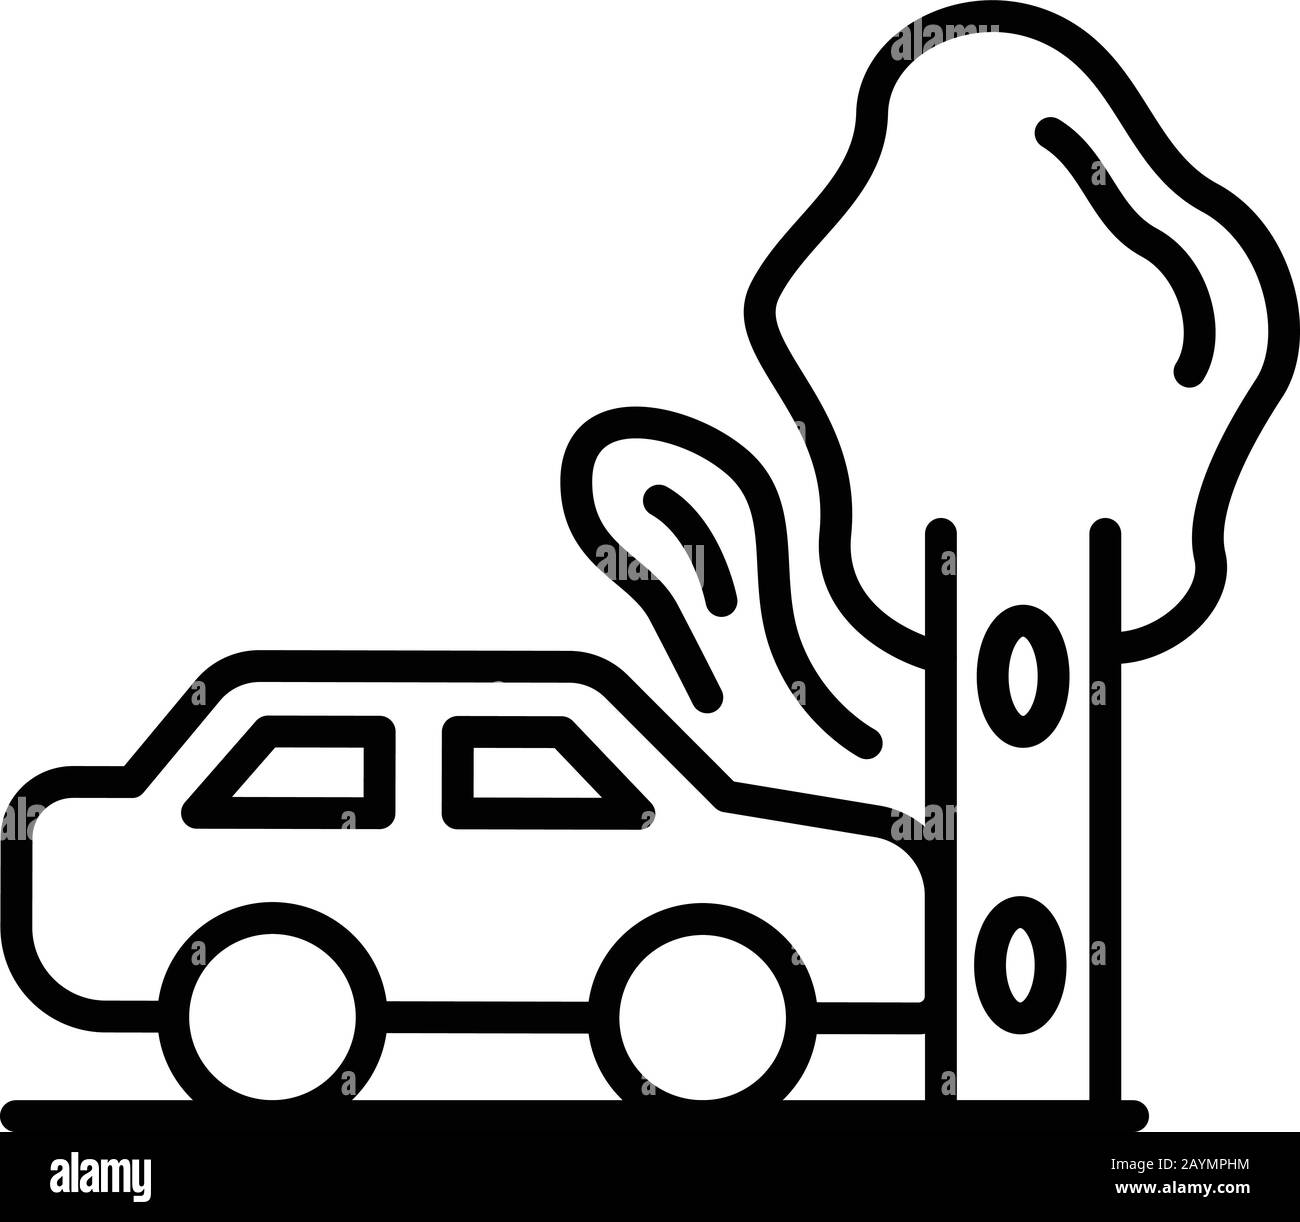 Tree car accident icon, outline style Stock Vector